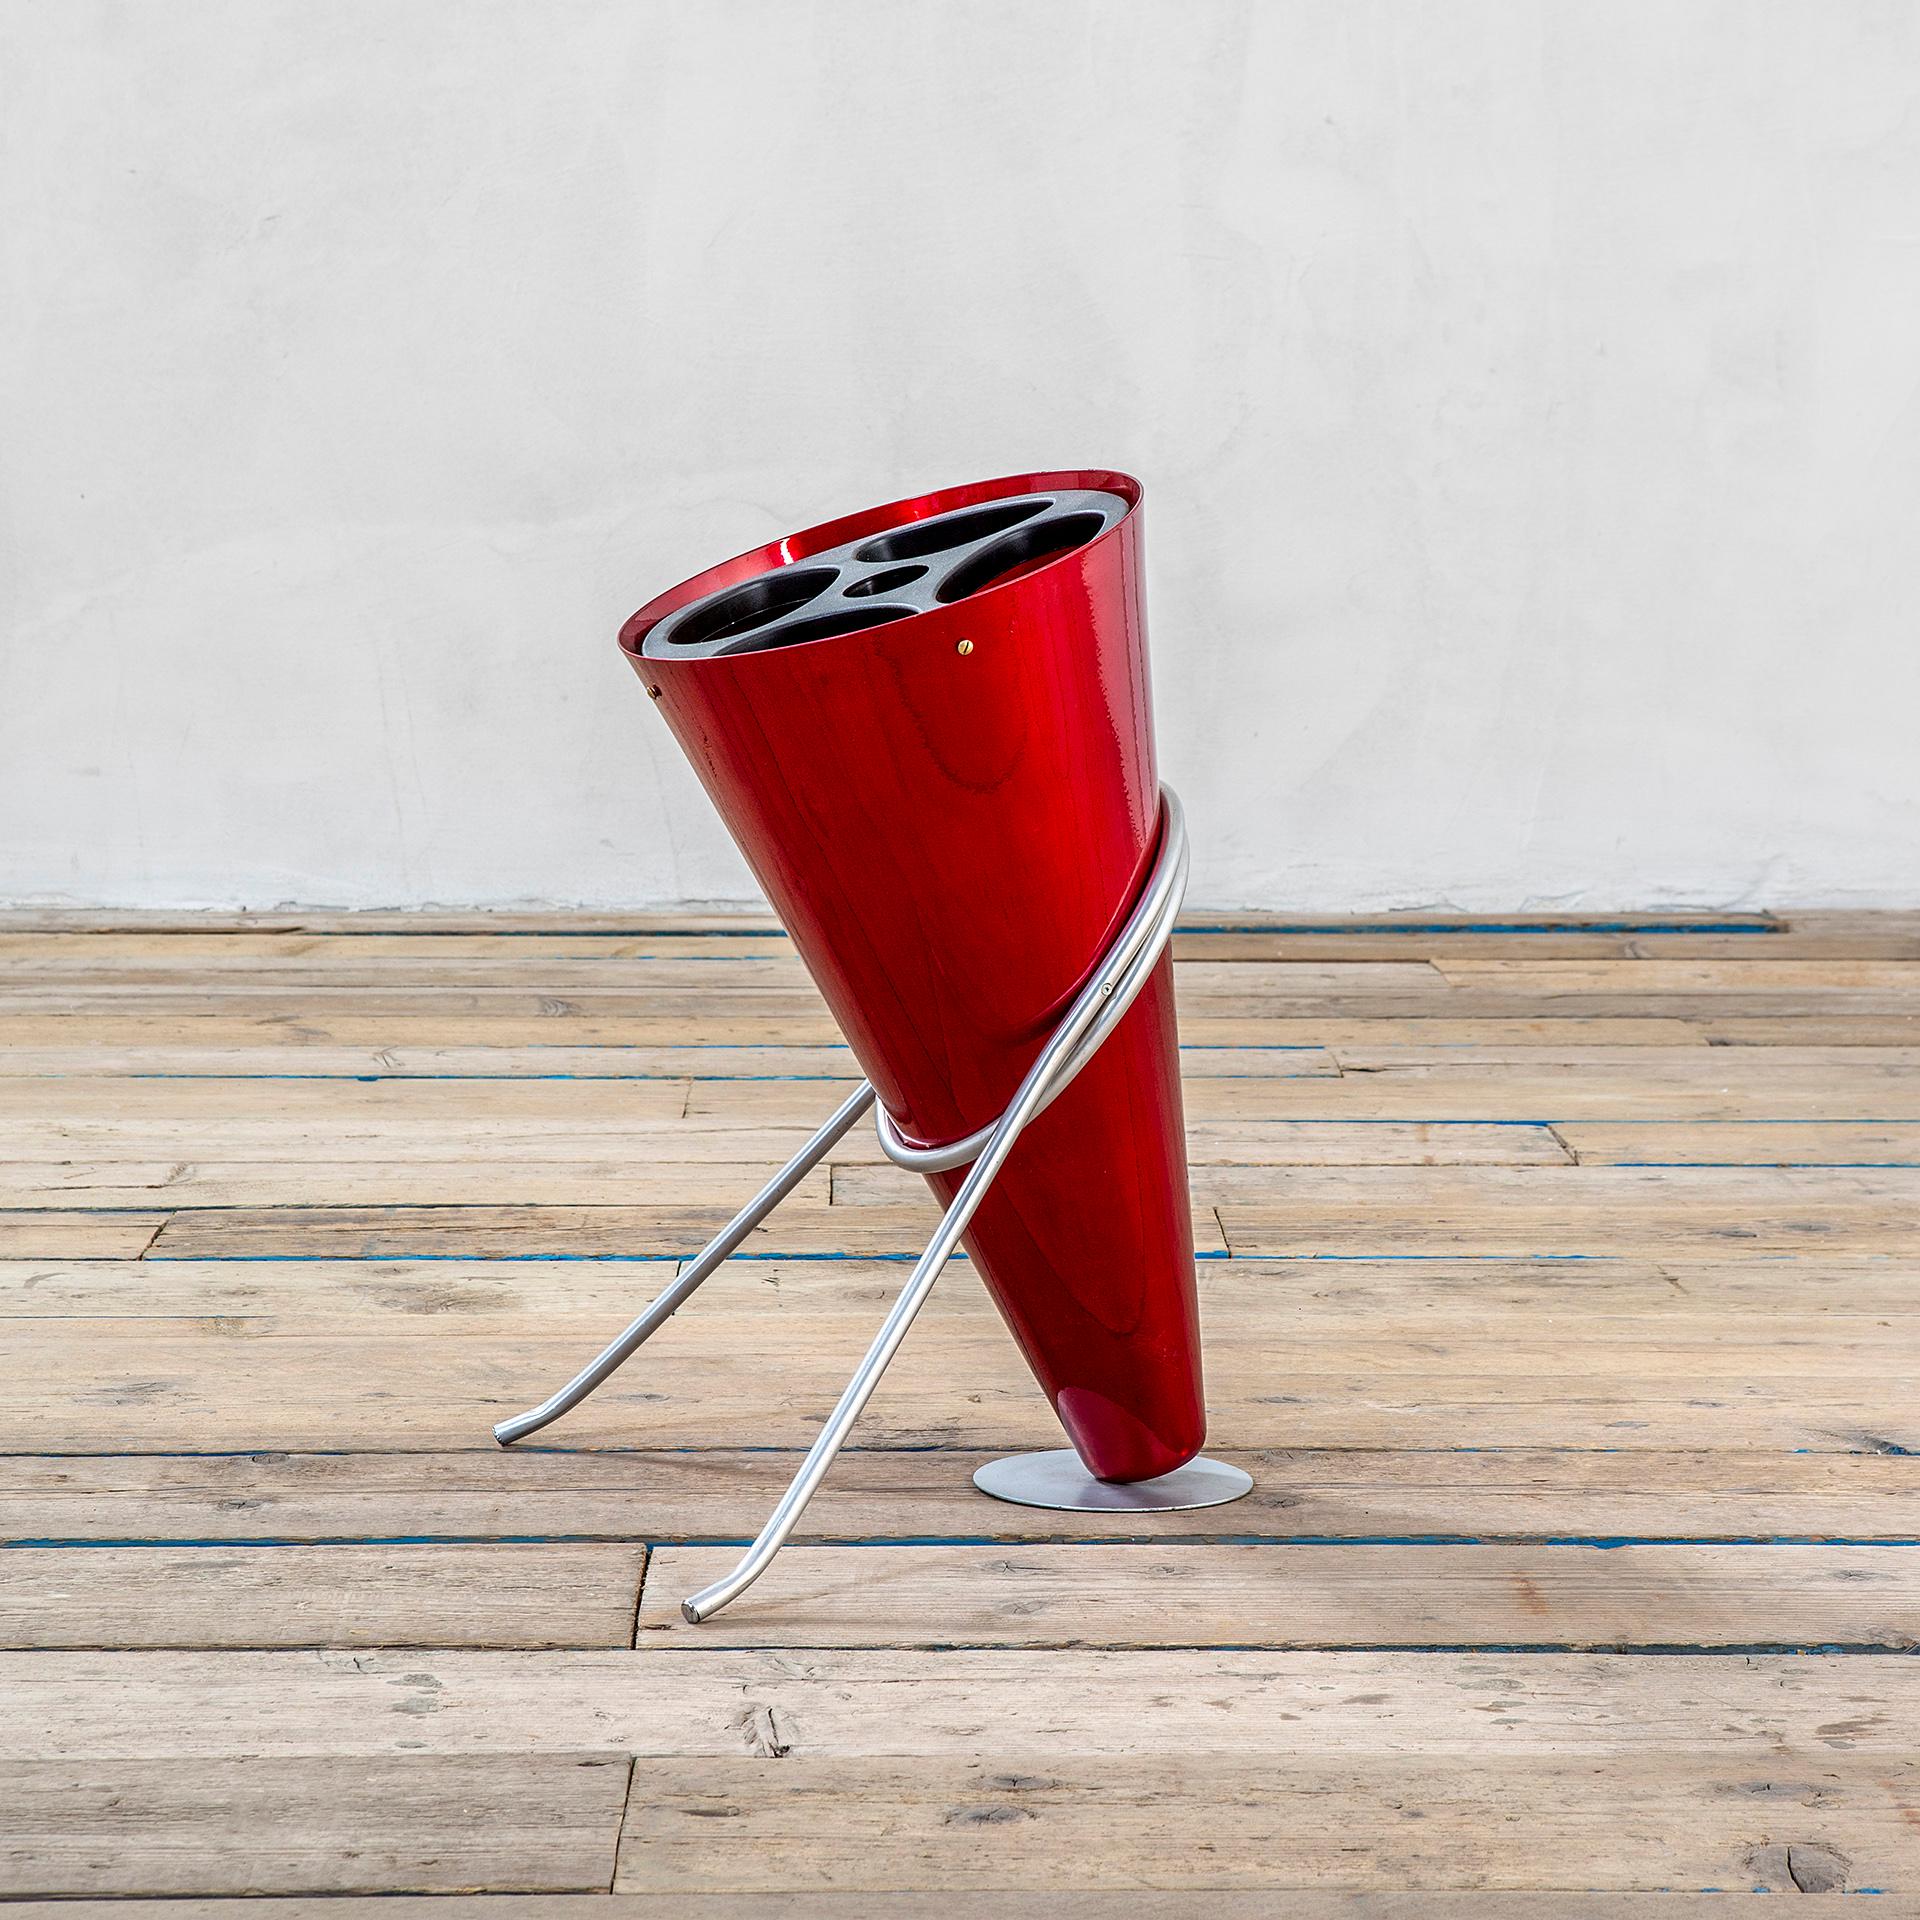 Umbrella standing designed by the master of Italian Design Ettore Sottsass, for the manufacturer Rinnovel in '70s. For Rinnovel, Sottsass designed different pieces, but this item is one of the most representative. The Umbrella Stand is in red